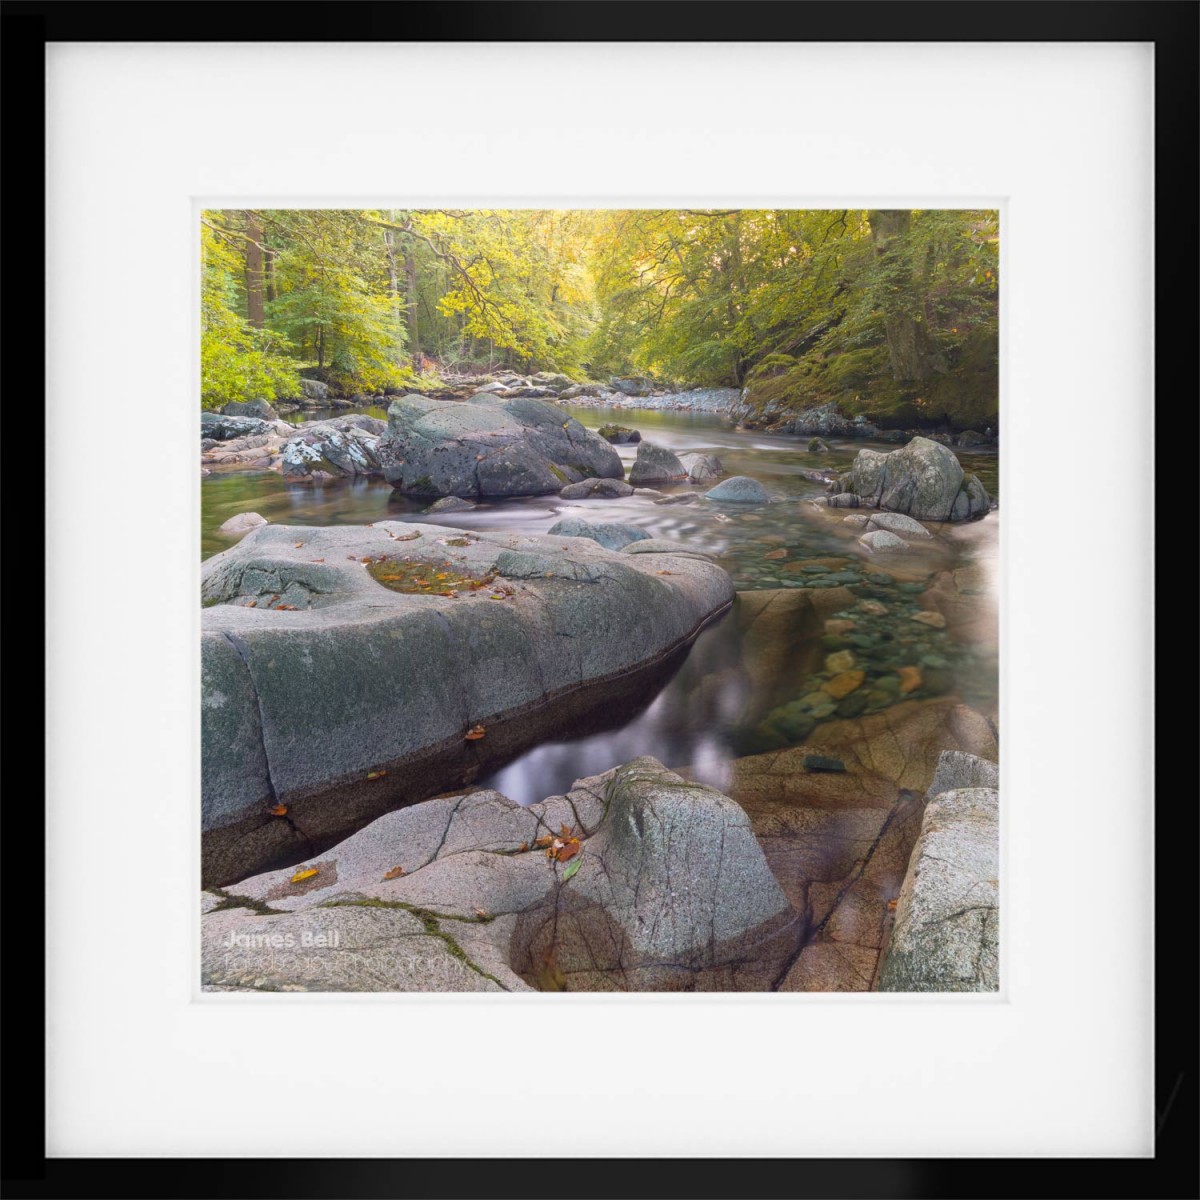 Framed Print of the River Eskdale in the Eskdale Valley Lake District.